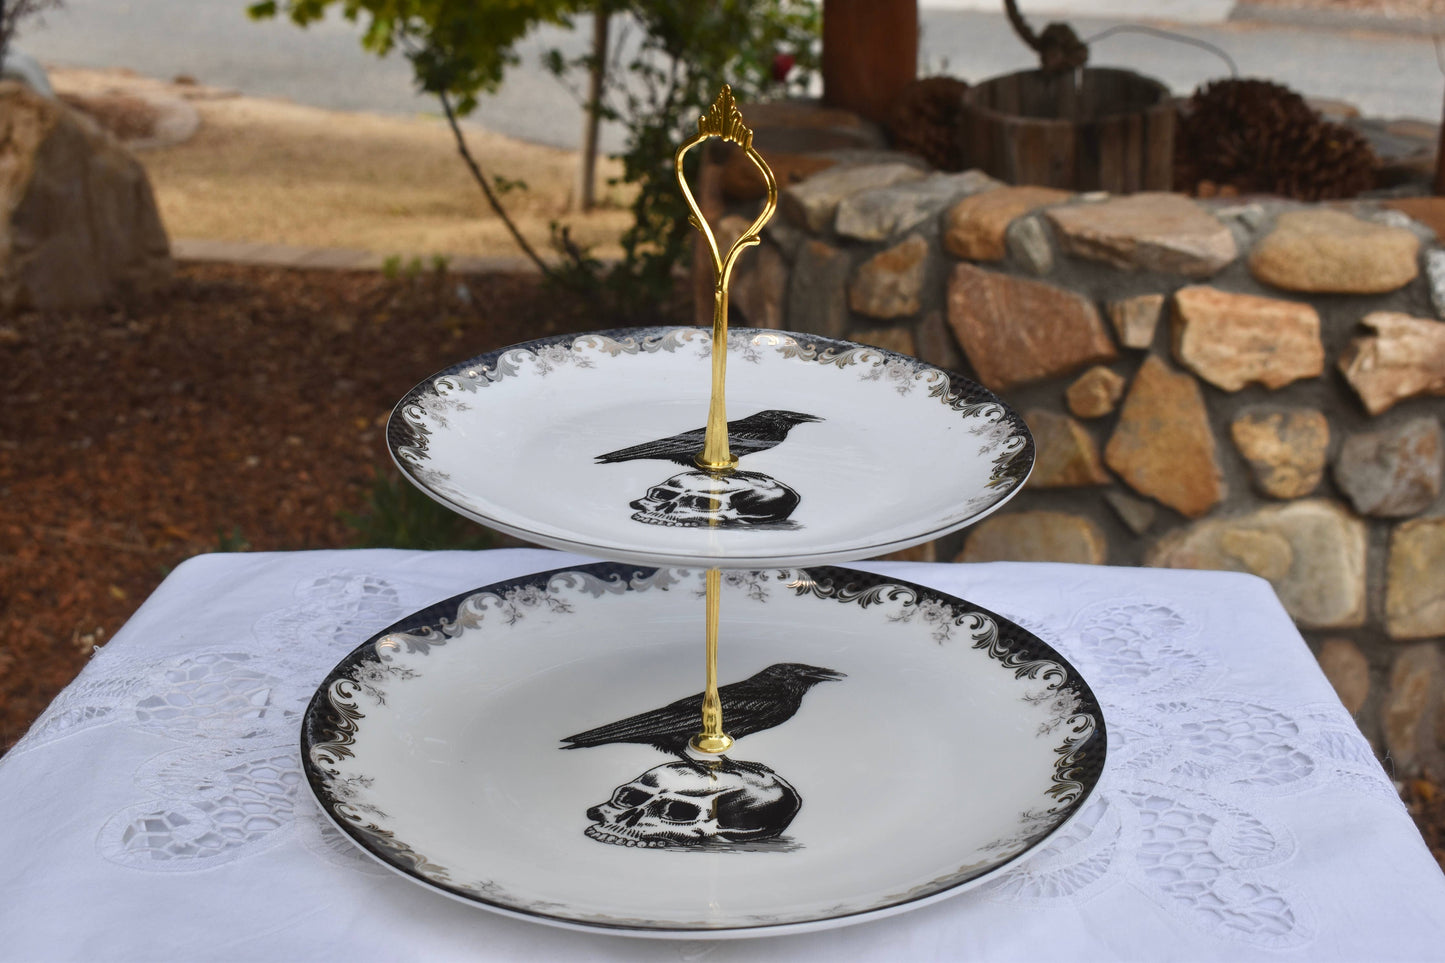 Madame Coco's Black Raven Tiered Cake Stand